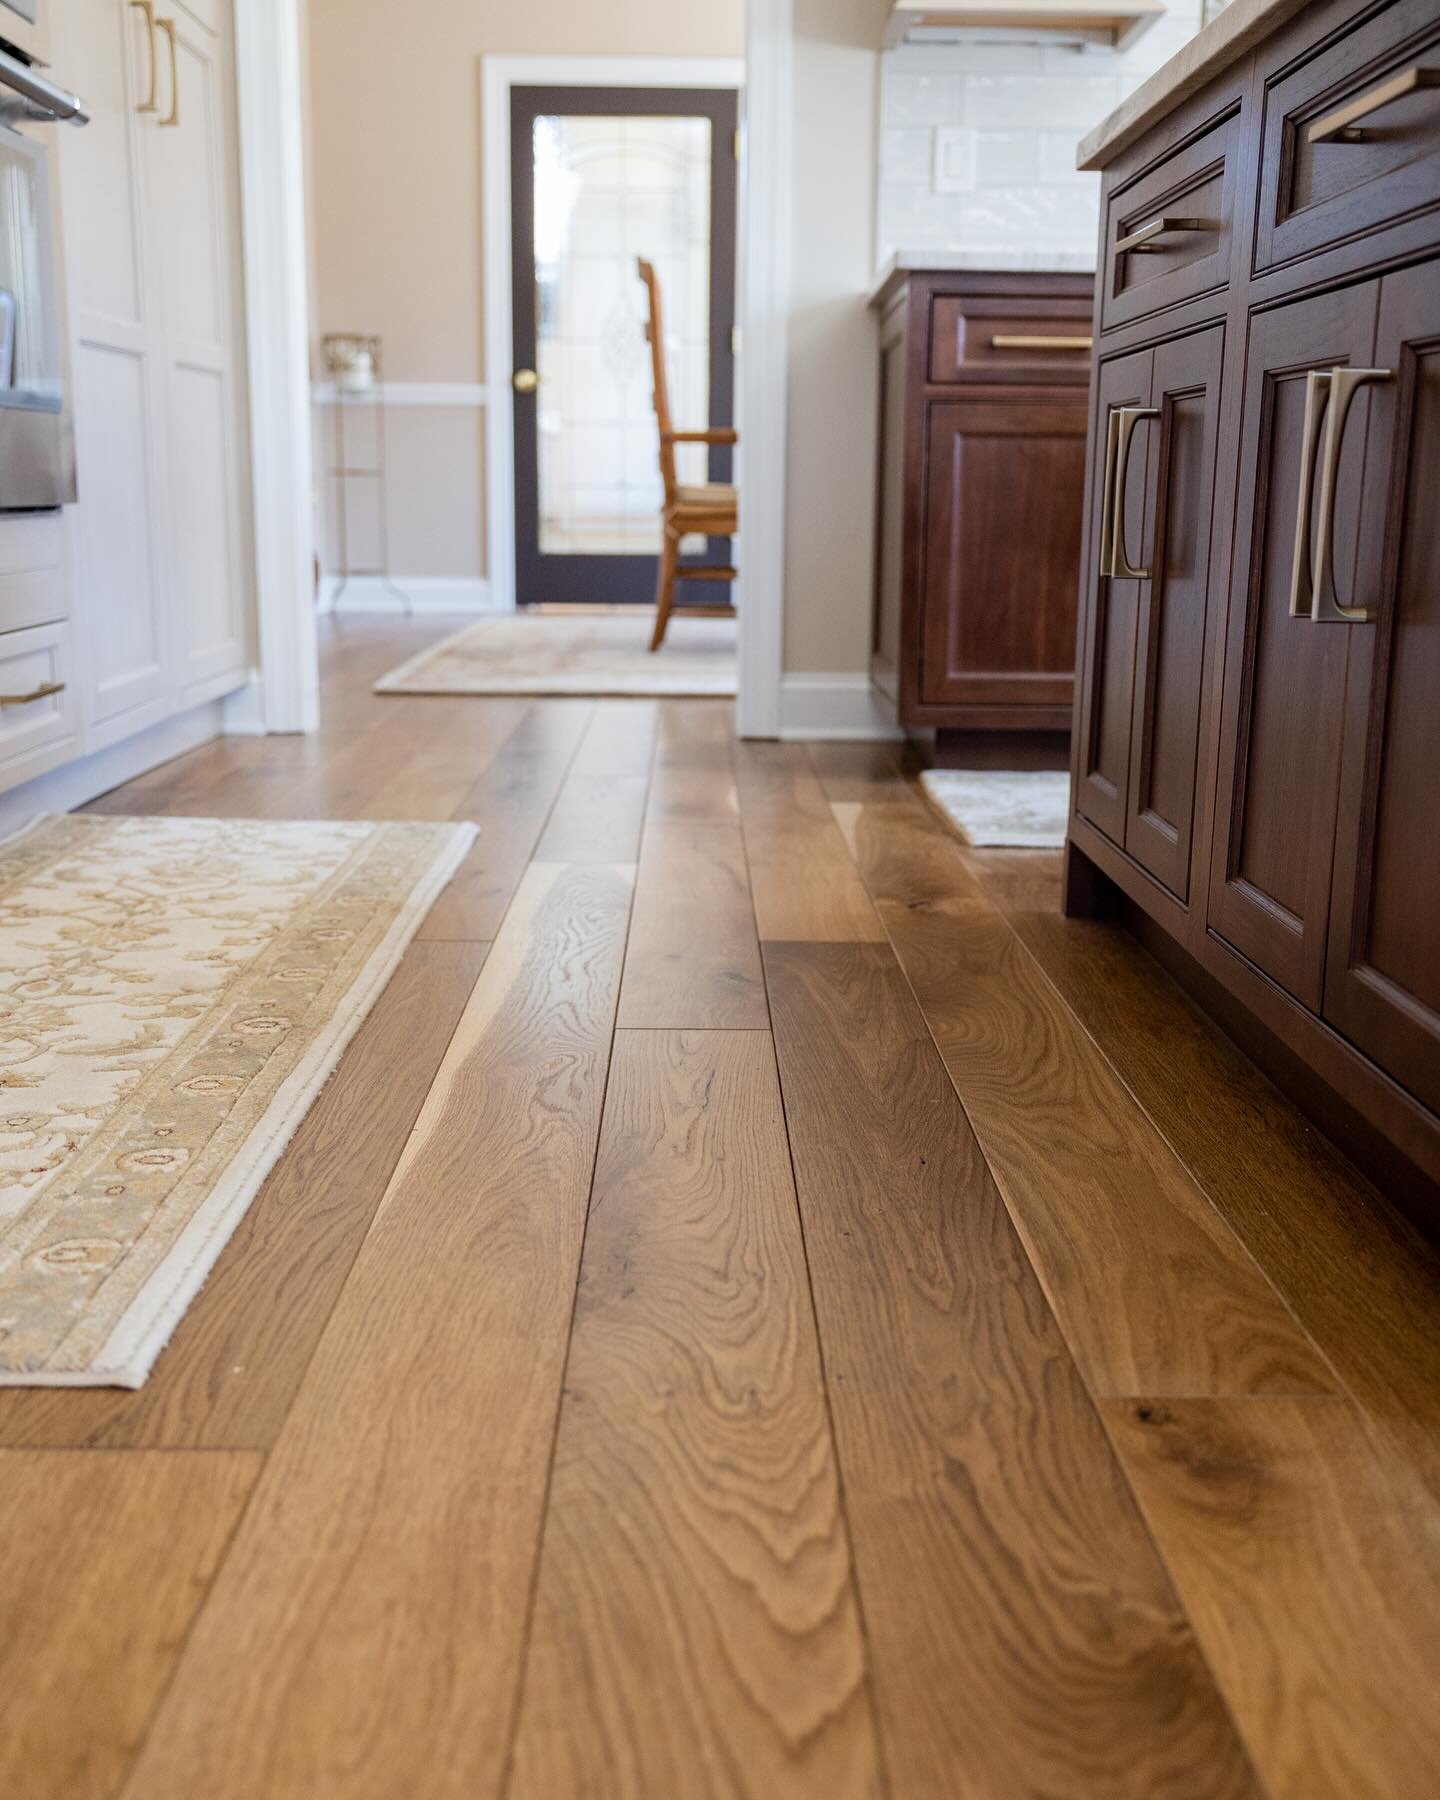 If we&rsquo;ve said it once we&rsquo;ll say it again, your flooring is the foundation of your space! Picking the right floor is an integral part of the design process and at Alpine we want to help you make the right decision for your home! 

Follow t